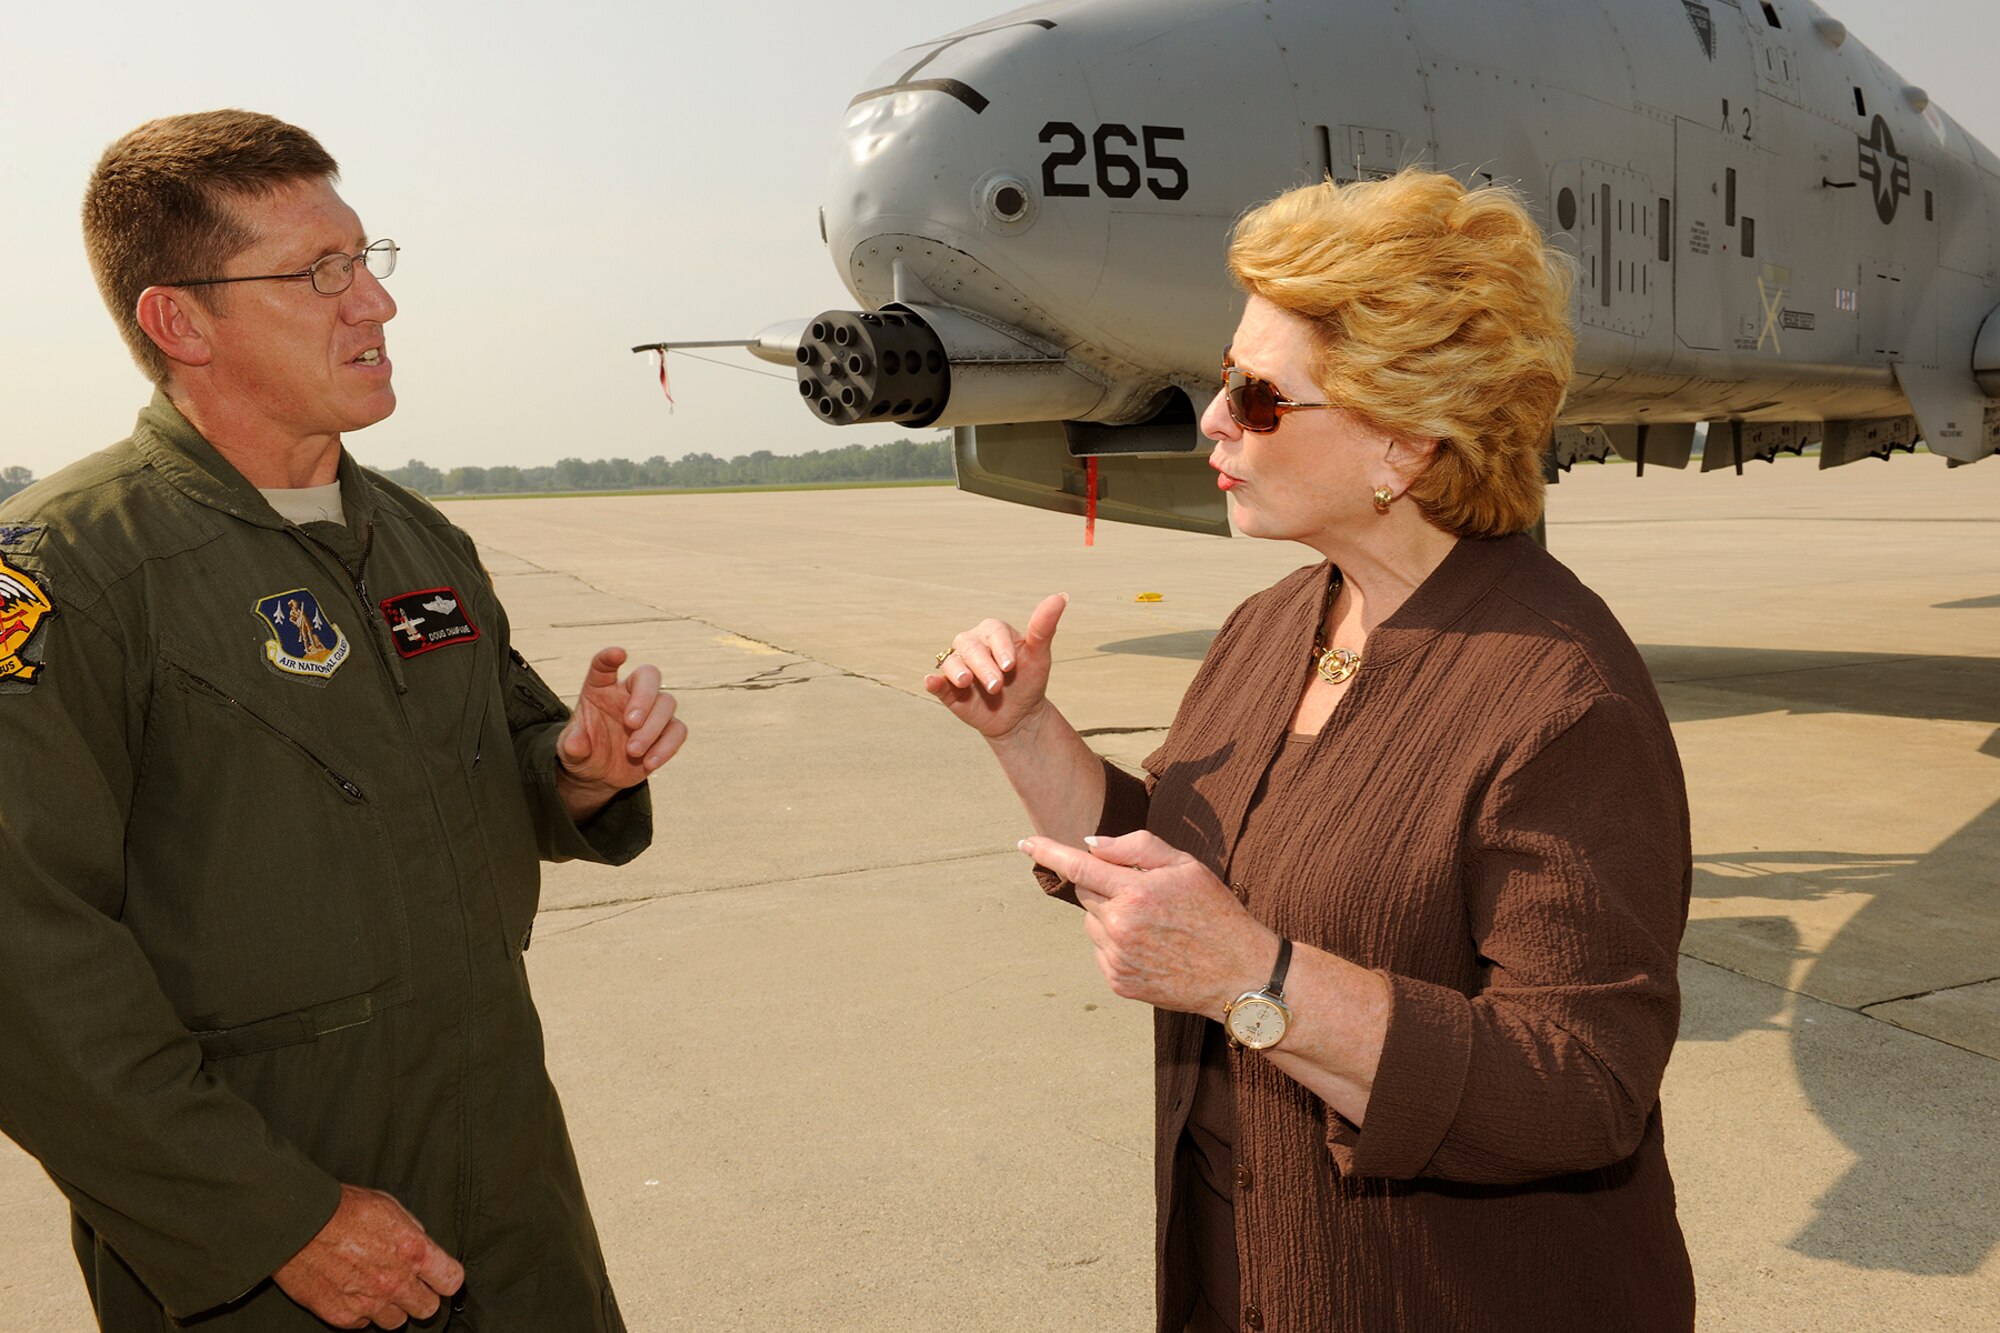 150902-Z-EZ686-087 -- Col. Douglas Champagne, commander of the 127th Operations Group and an A-10 Thunderbolt II pilot, explains the capabilities of the aircraft to U.S. Sen. Debbie Stabenow, D-Mich., during a visit by a Congressional delegation to Selfridge Air National Guard Base, Mich., Sept. 2, 2015. Selfridge was the first stop on a two-day tour of all of Michigan major military installations. Seven Michigan members of Congress and many of their staff aides participated in the trip. (U.S. Air National Guard photos by Master Sgt. David Kujawa / Released)